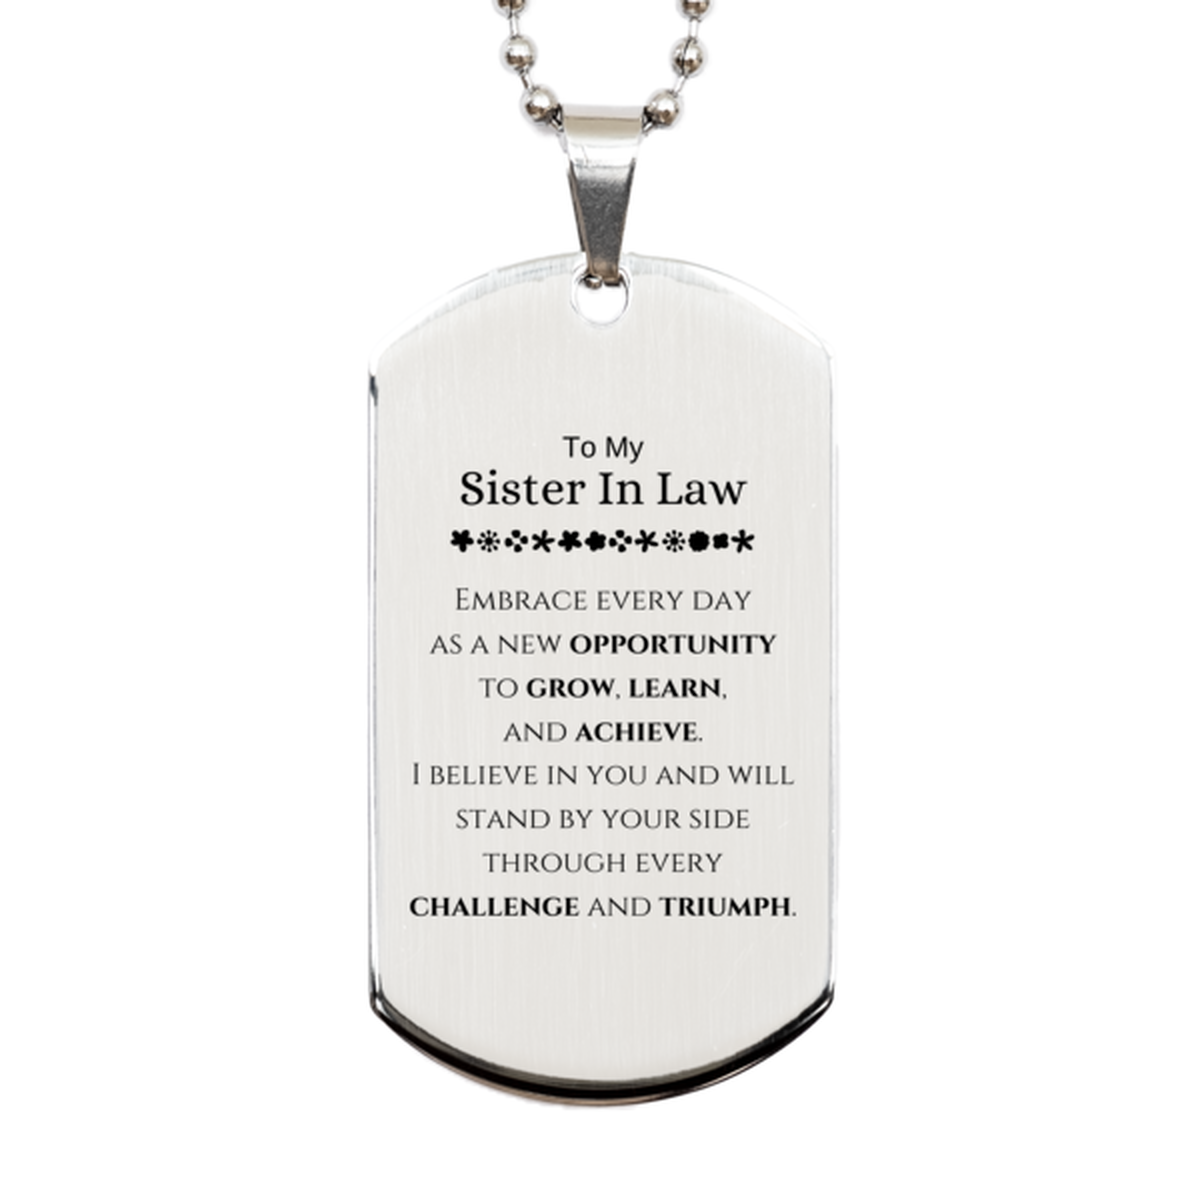 To My Sister In Law Gifts, I believe in you and will stand by your side, Inspirational Silver Dog Tag For Sister In Law, Birthday Christmas Motivational Sister In Law Gifts